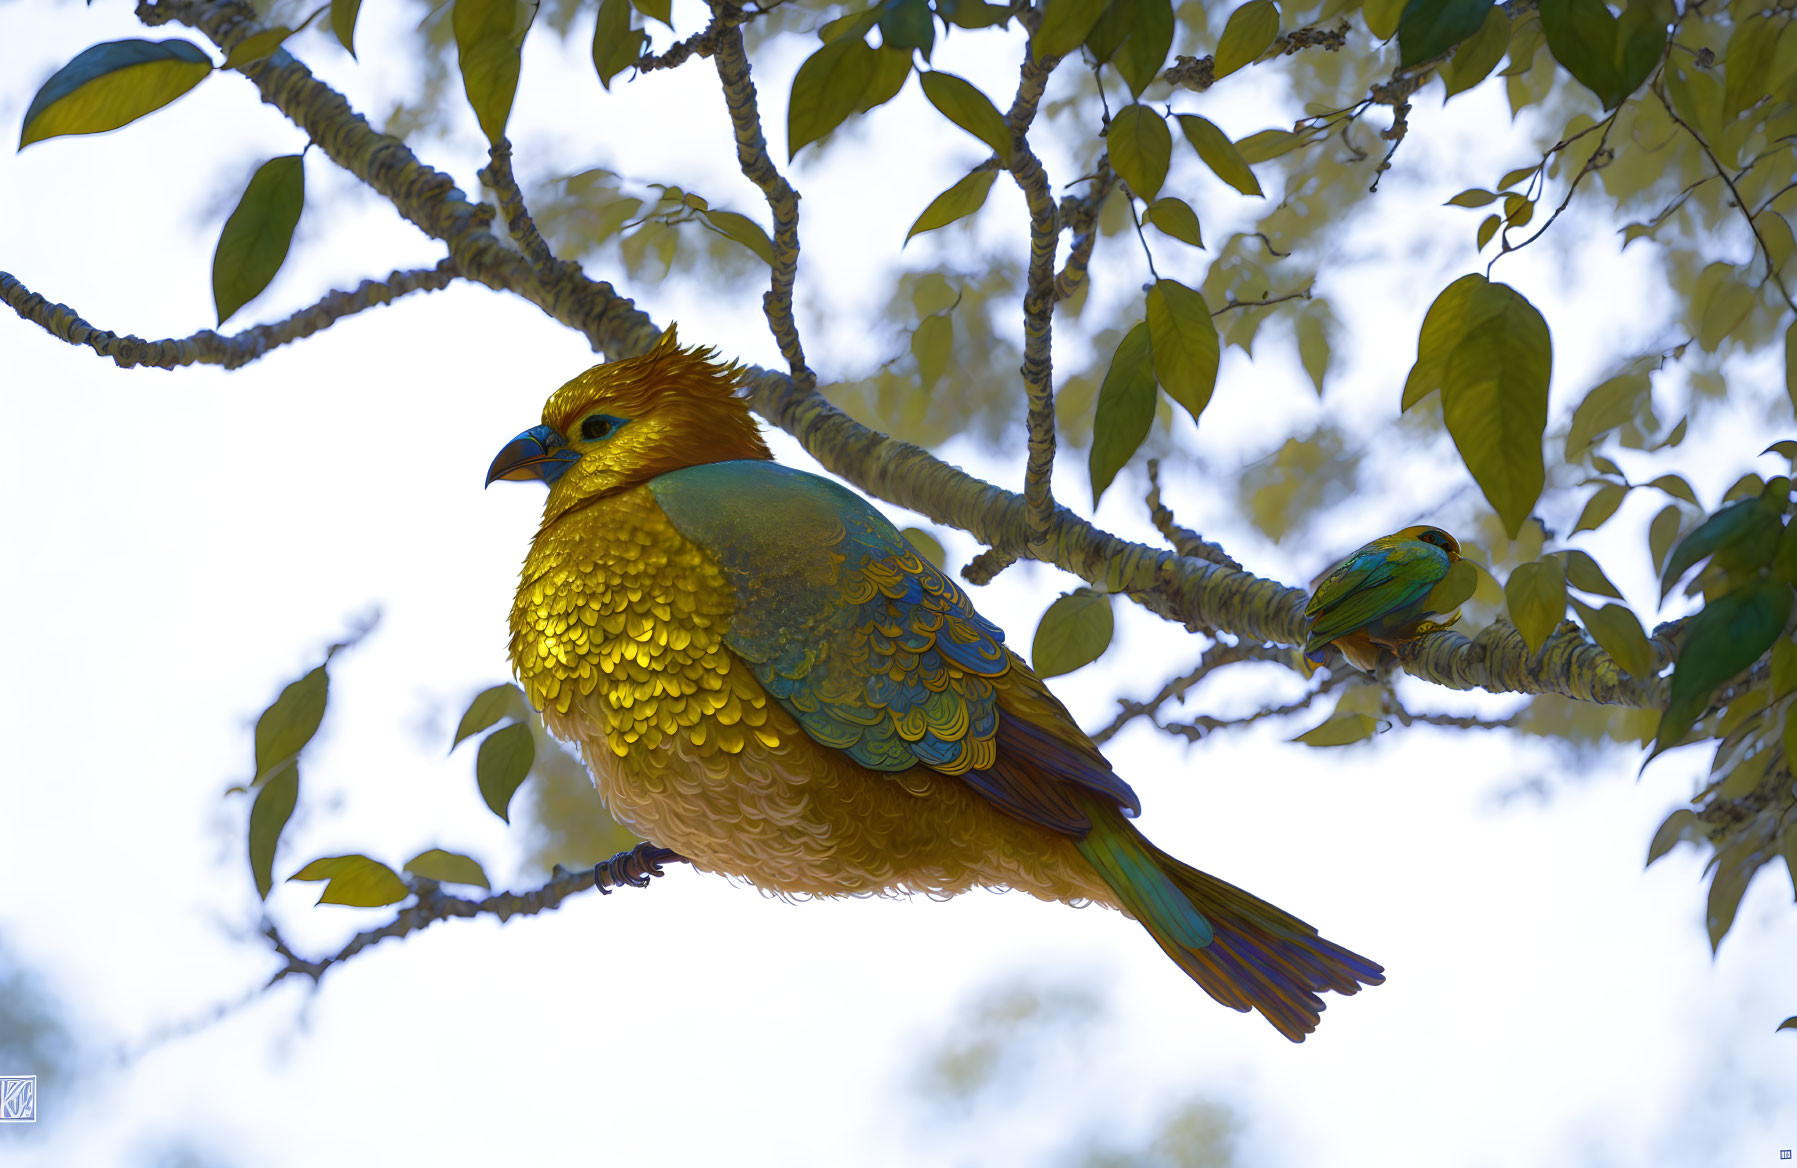 Colorful bird with golden and teal plumage perched on branch in nature scene